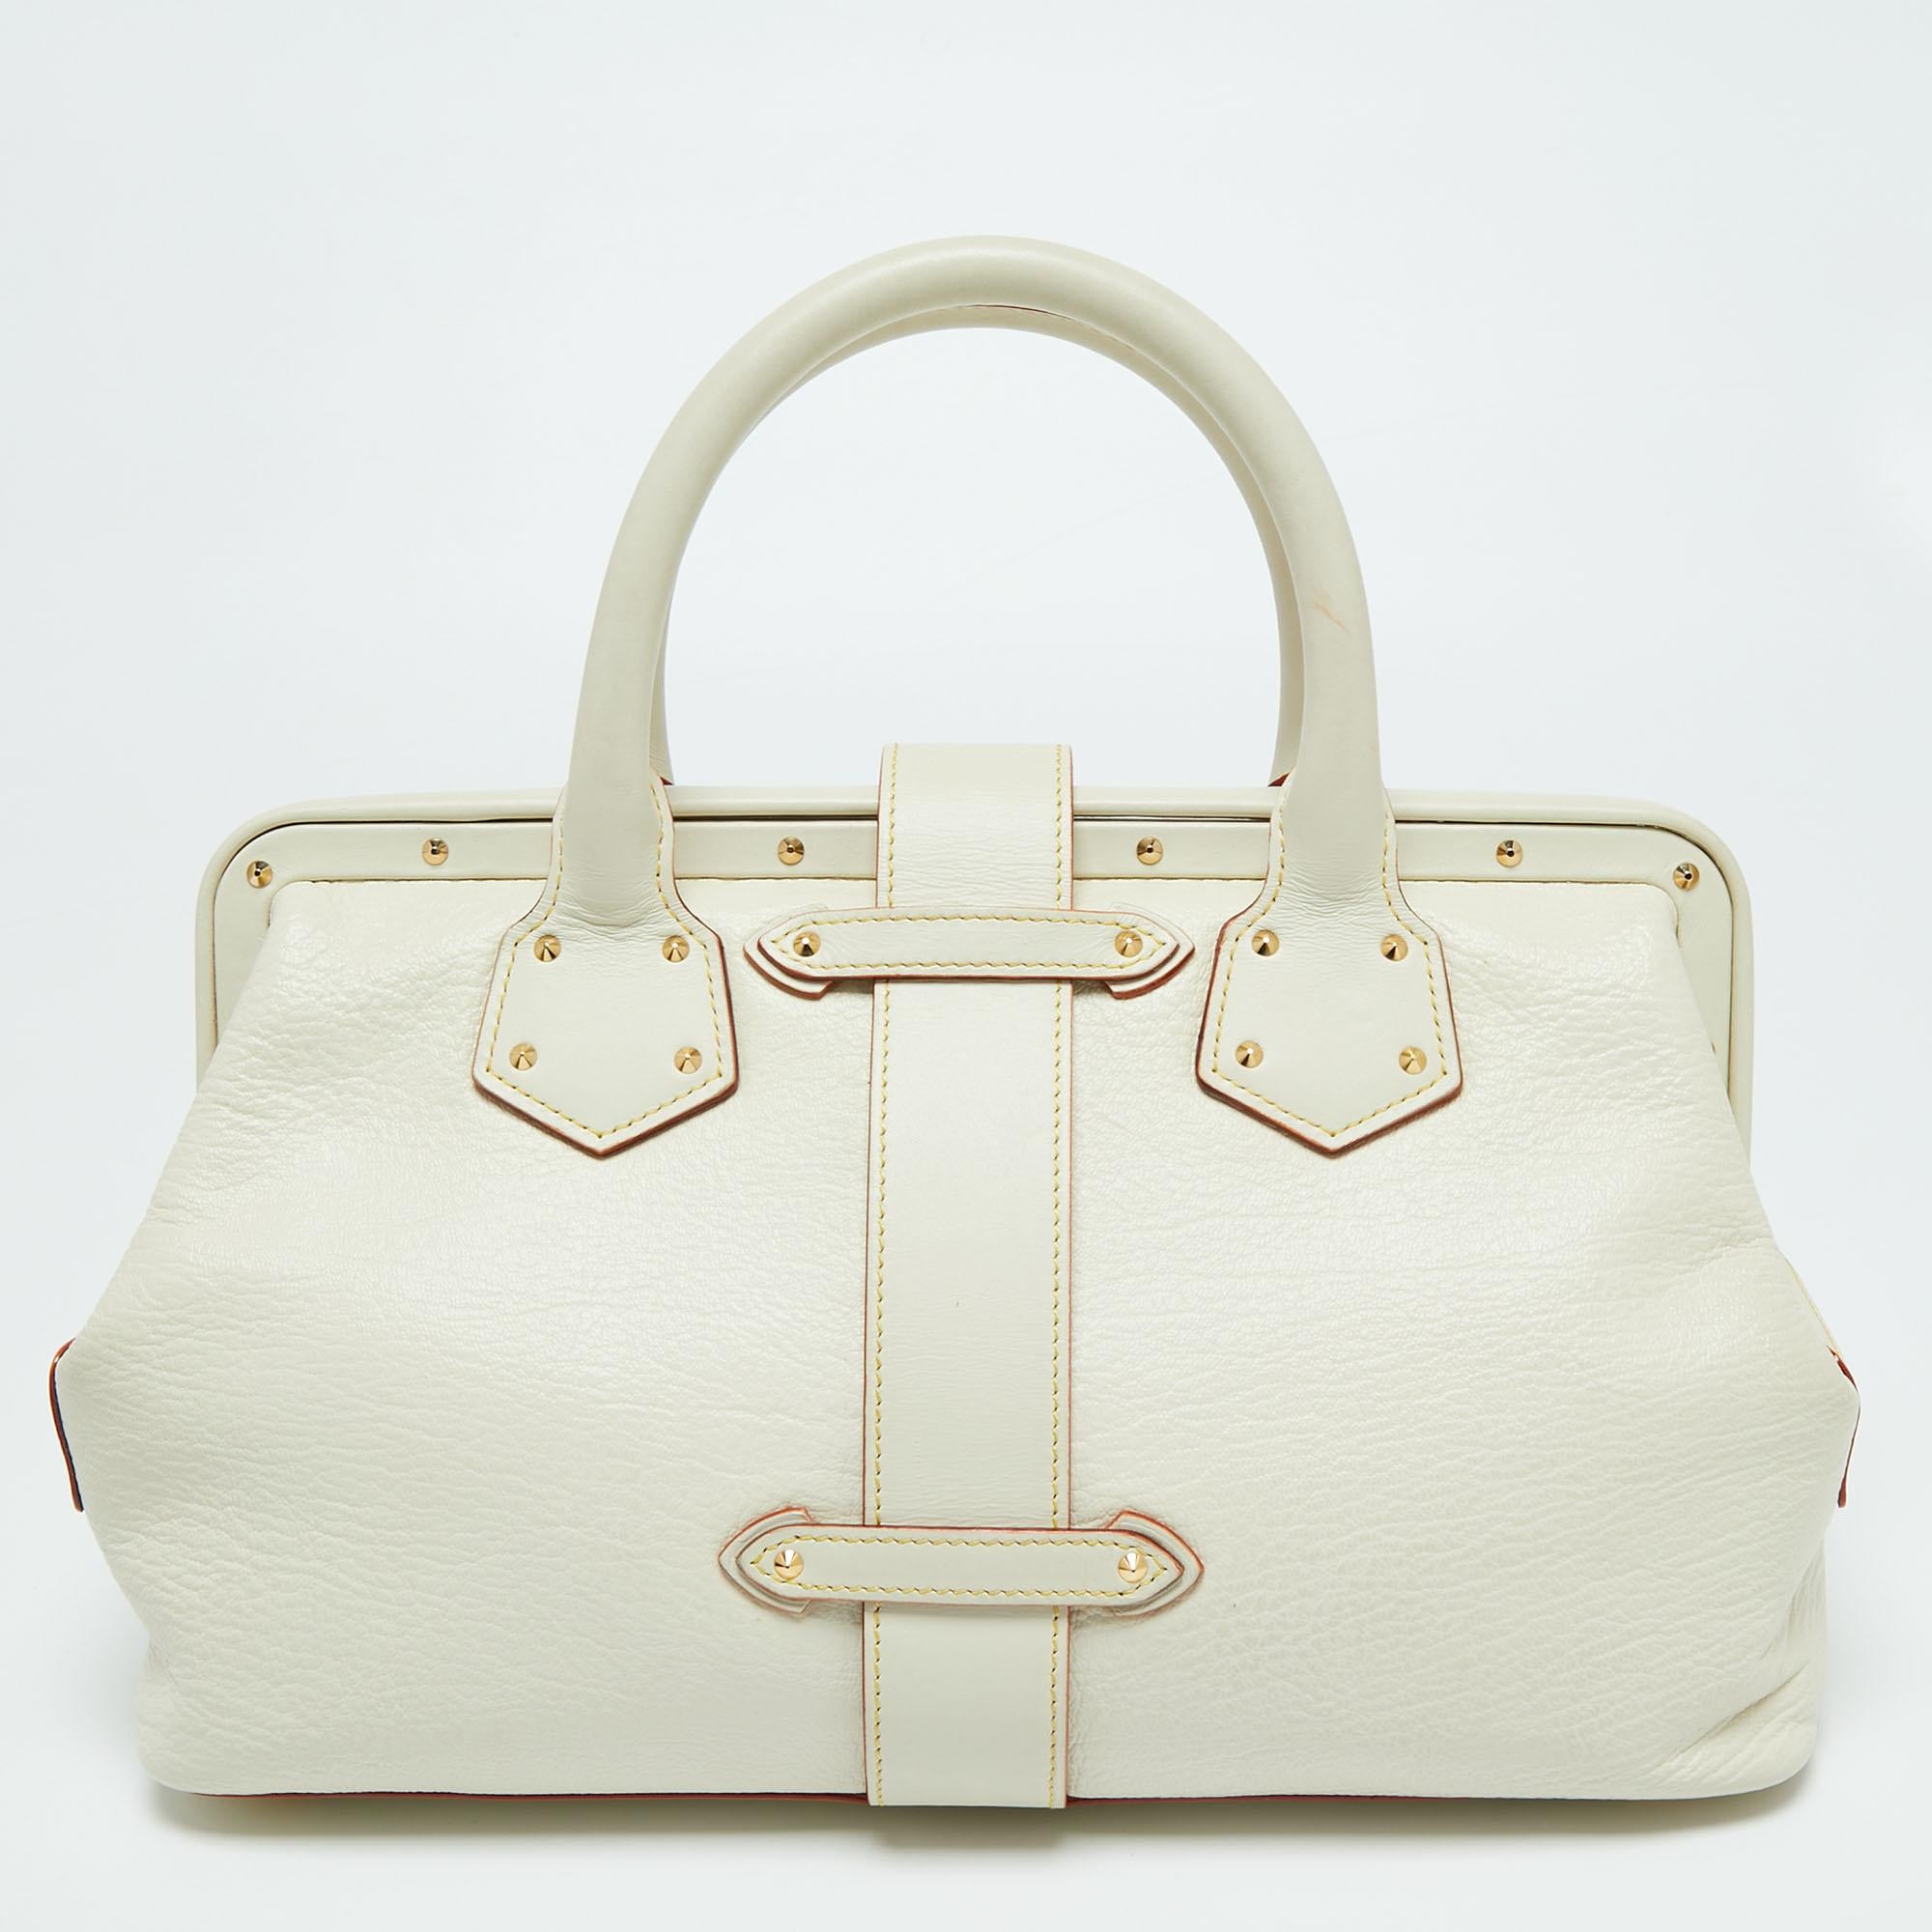 This Louis Vuitton Lingenieux PM bag is crafted to perfection. This off-white Suhali leather bag is adorned with gold-tone studs, a signature lock with the Louis Vuitton insignia, and side zip pockets. The interior is lined with fabric. The rolled